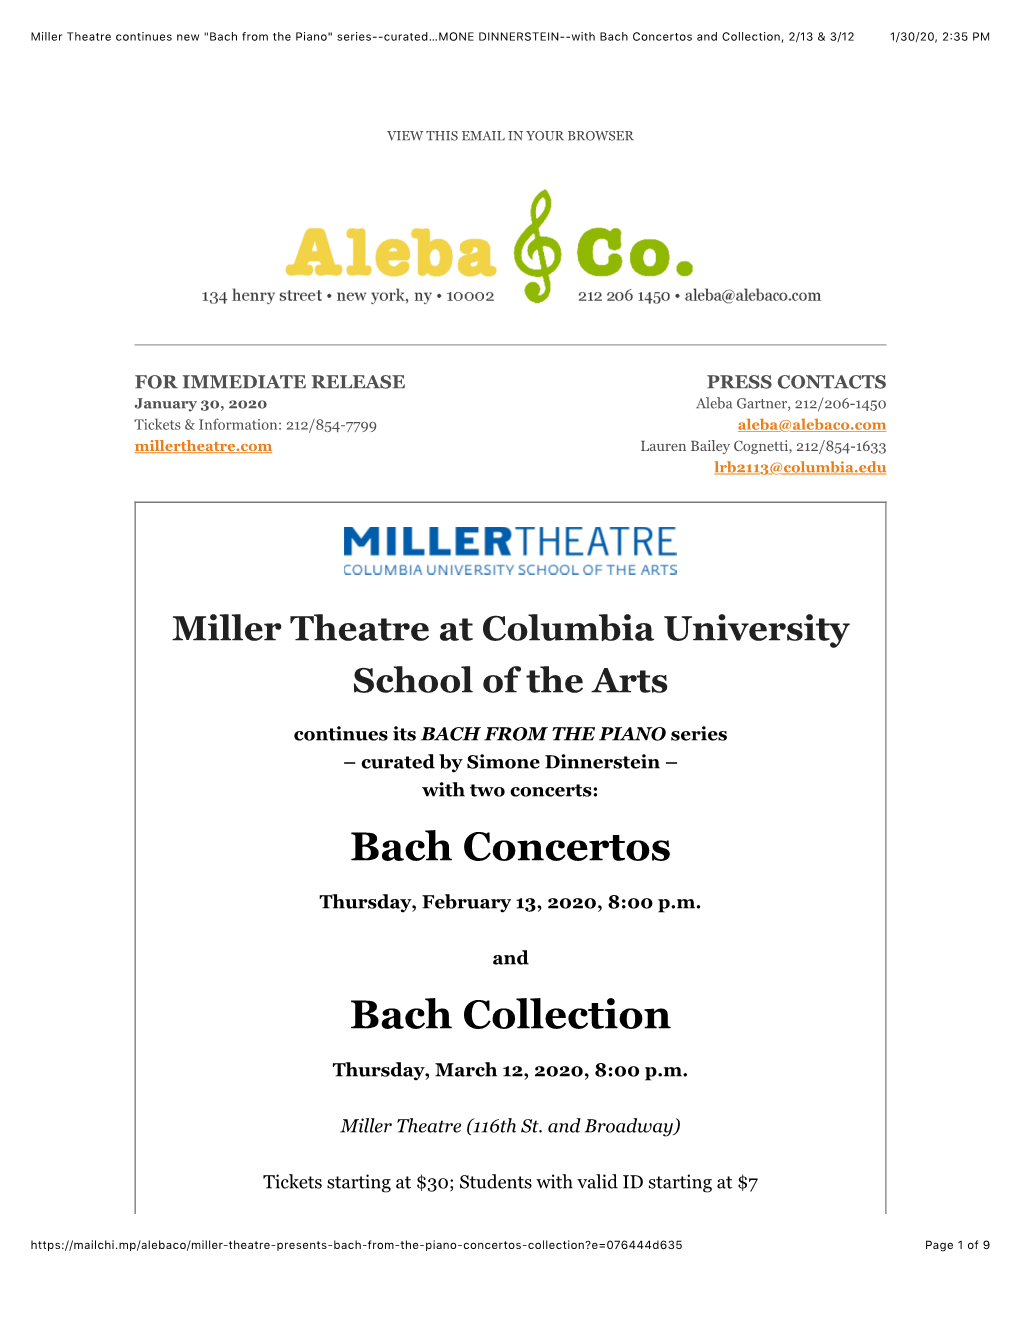 Miller Theatre Continues New "Bach from the Piano" Series--Curated by SIMONE DINNERSTEIN--With Bach Concertos and Coll